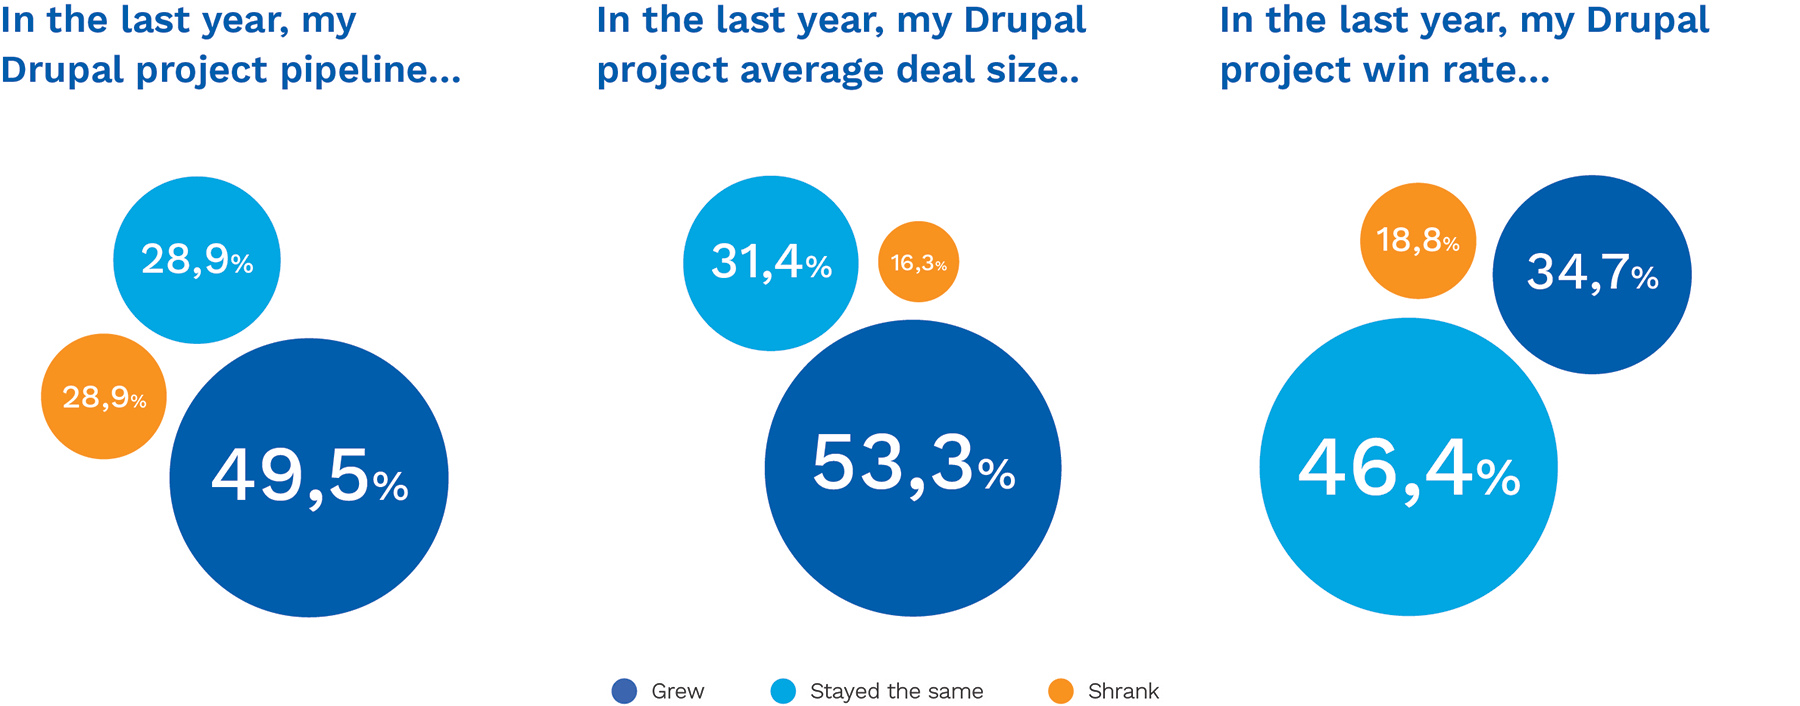 Drupal project win-rate